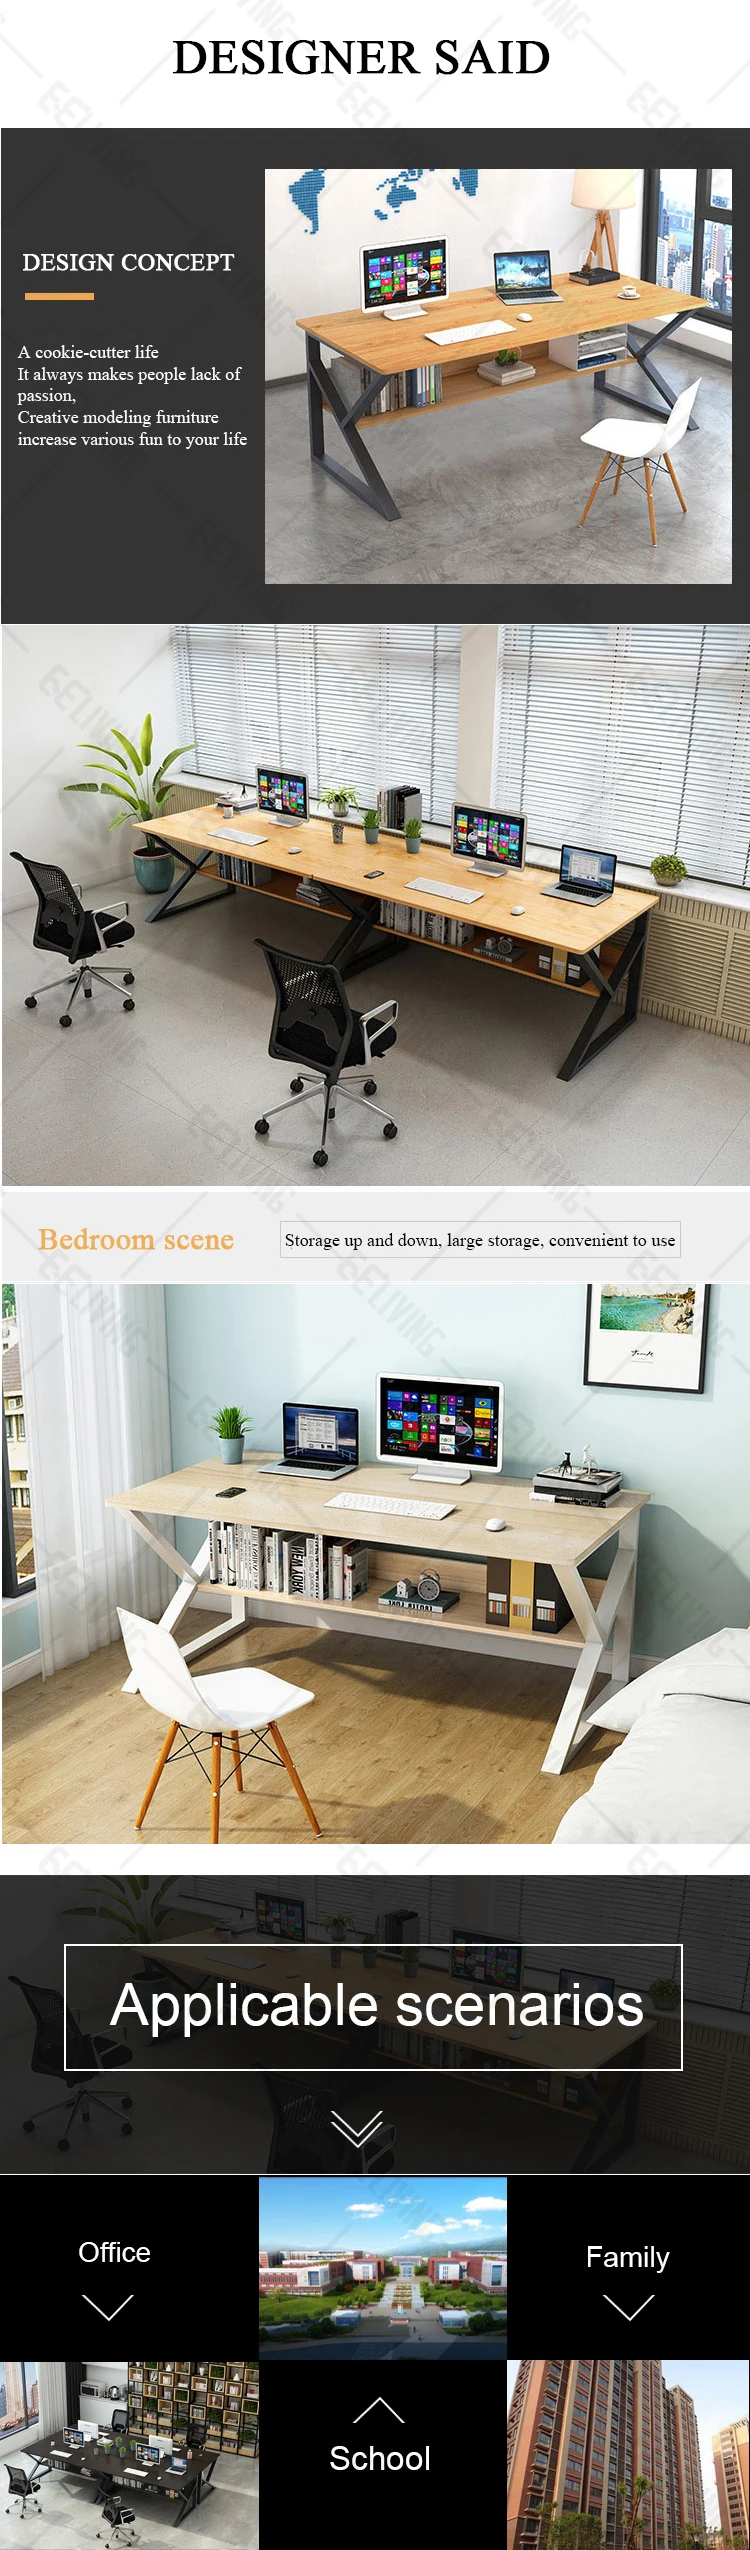 Modern Office Home Computer Ergonomic Children Table Kids Study Desk With Chair